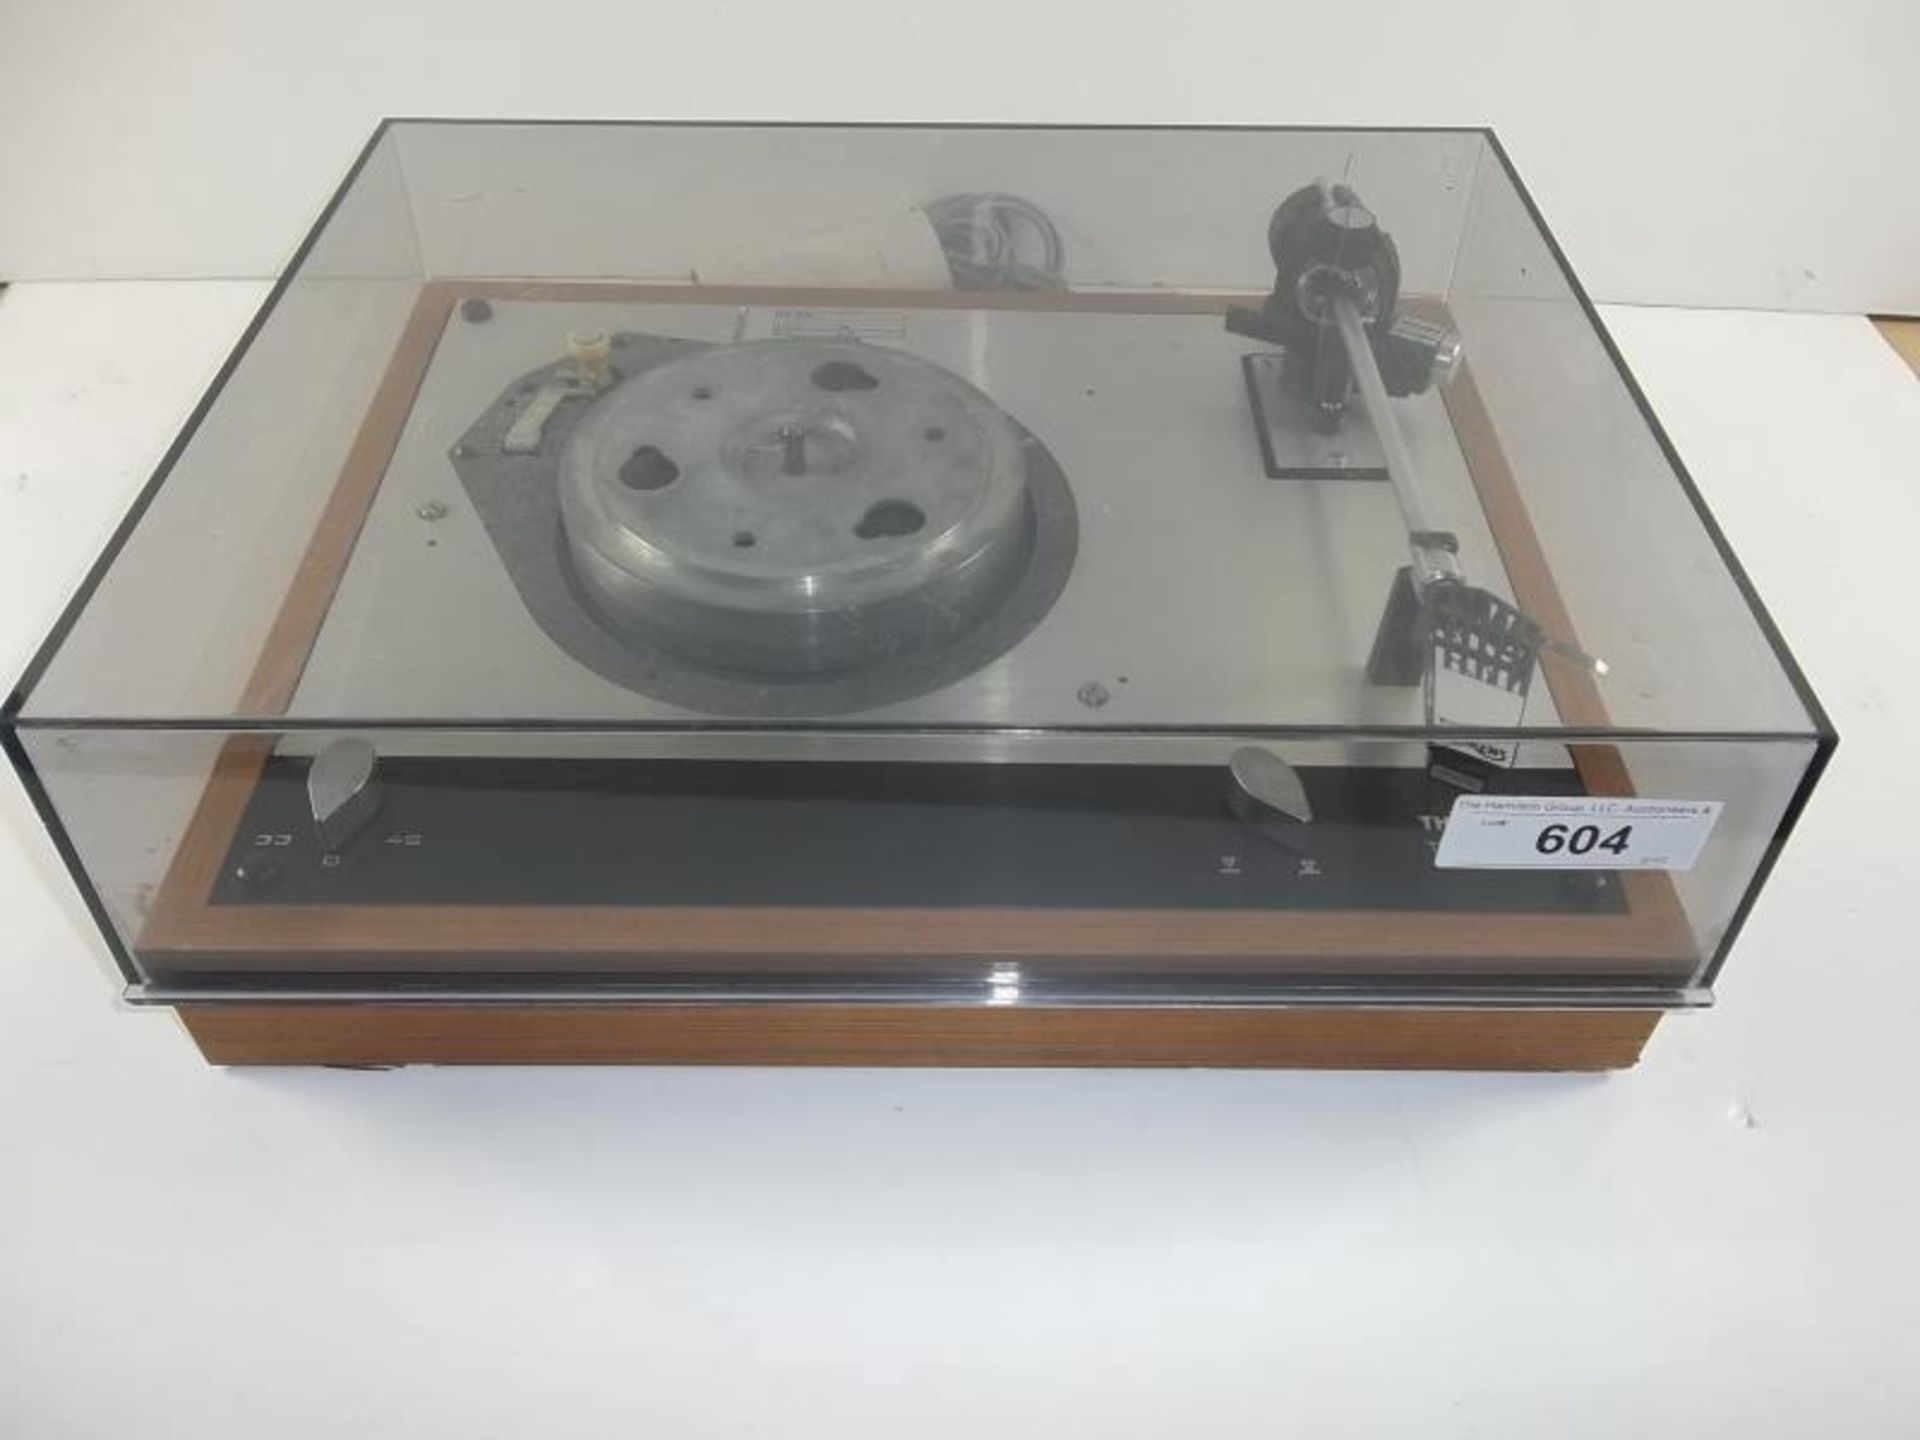 Thorens TD-160 with a Thorens arm,no turn table or mat, head is broken off, dust cover with split